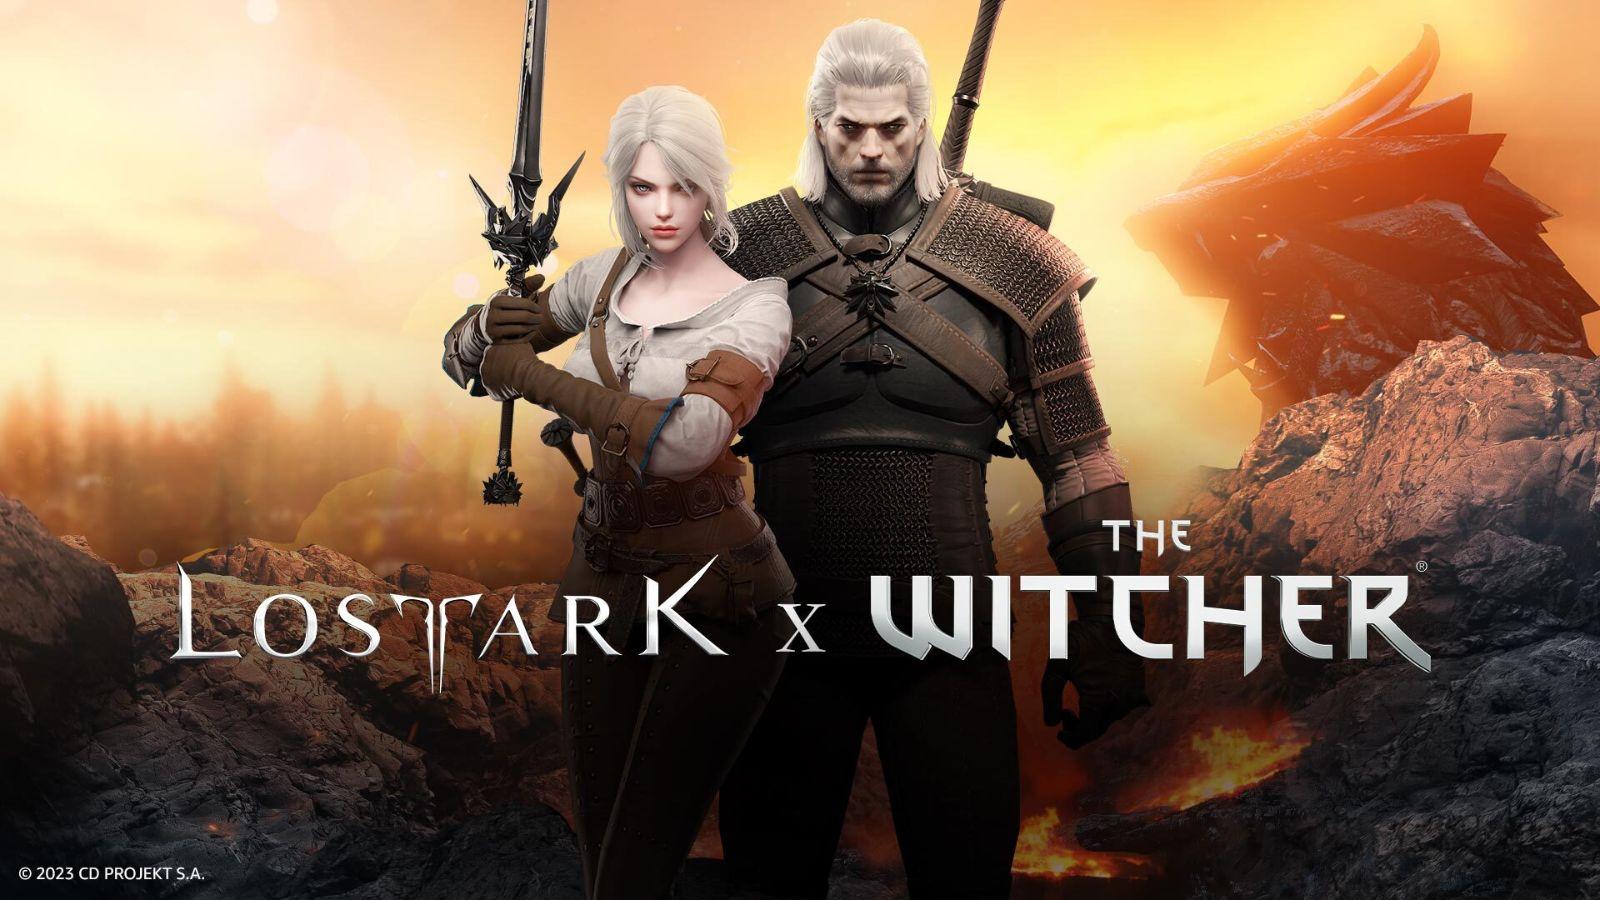 Lost Ark the witcher crossover